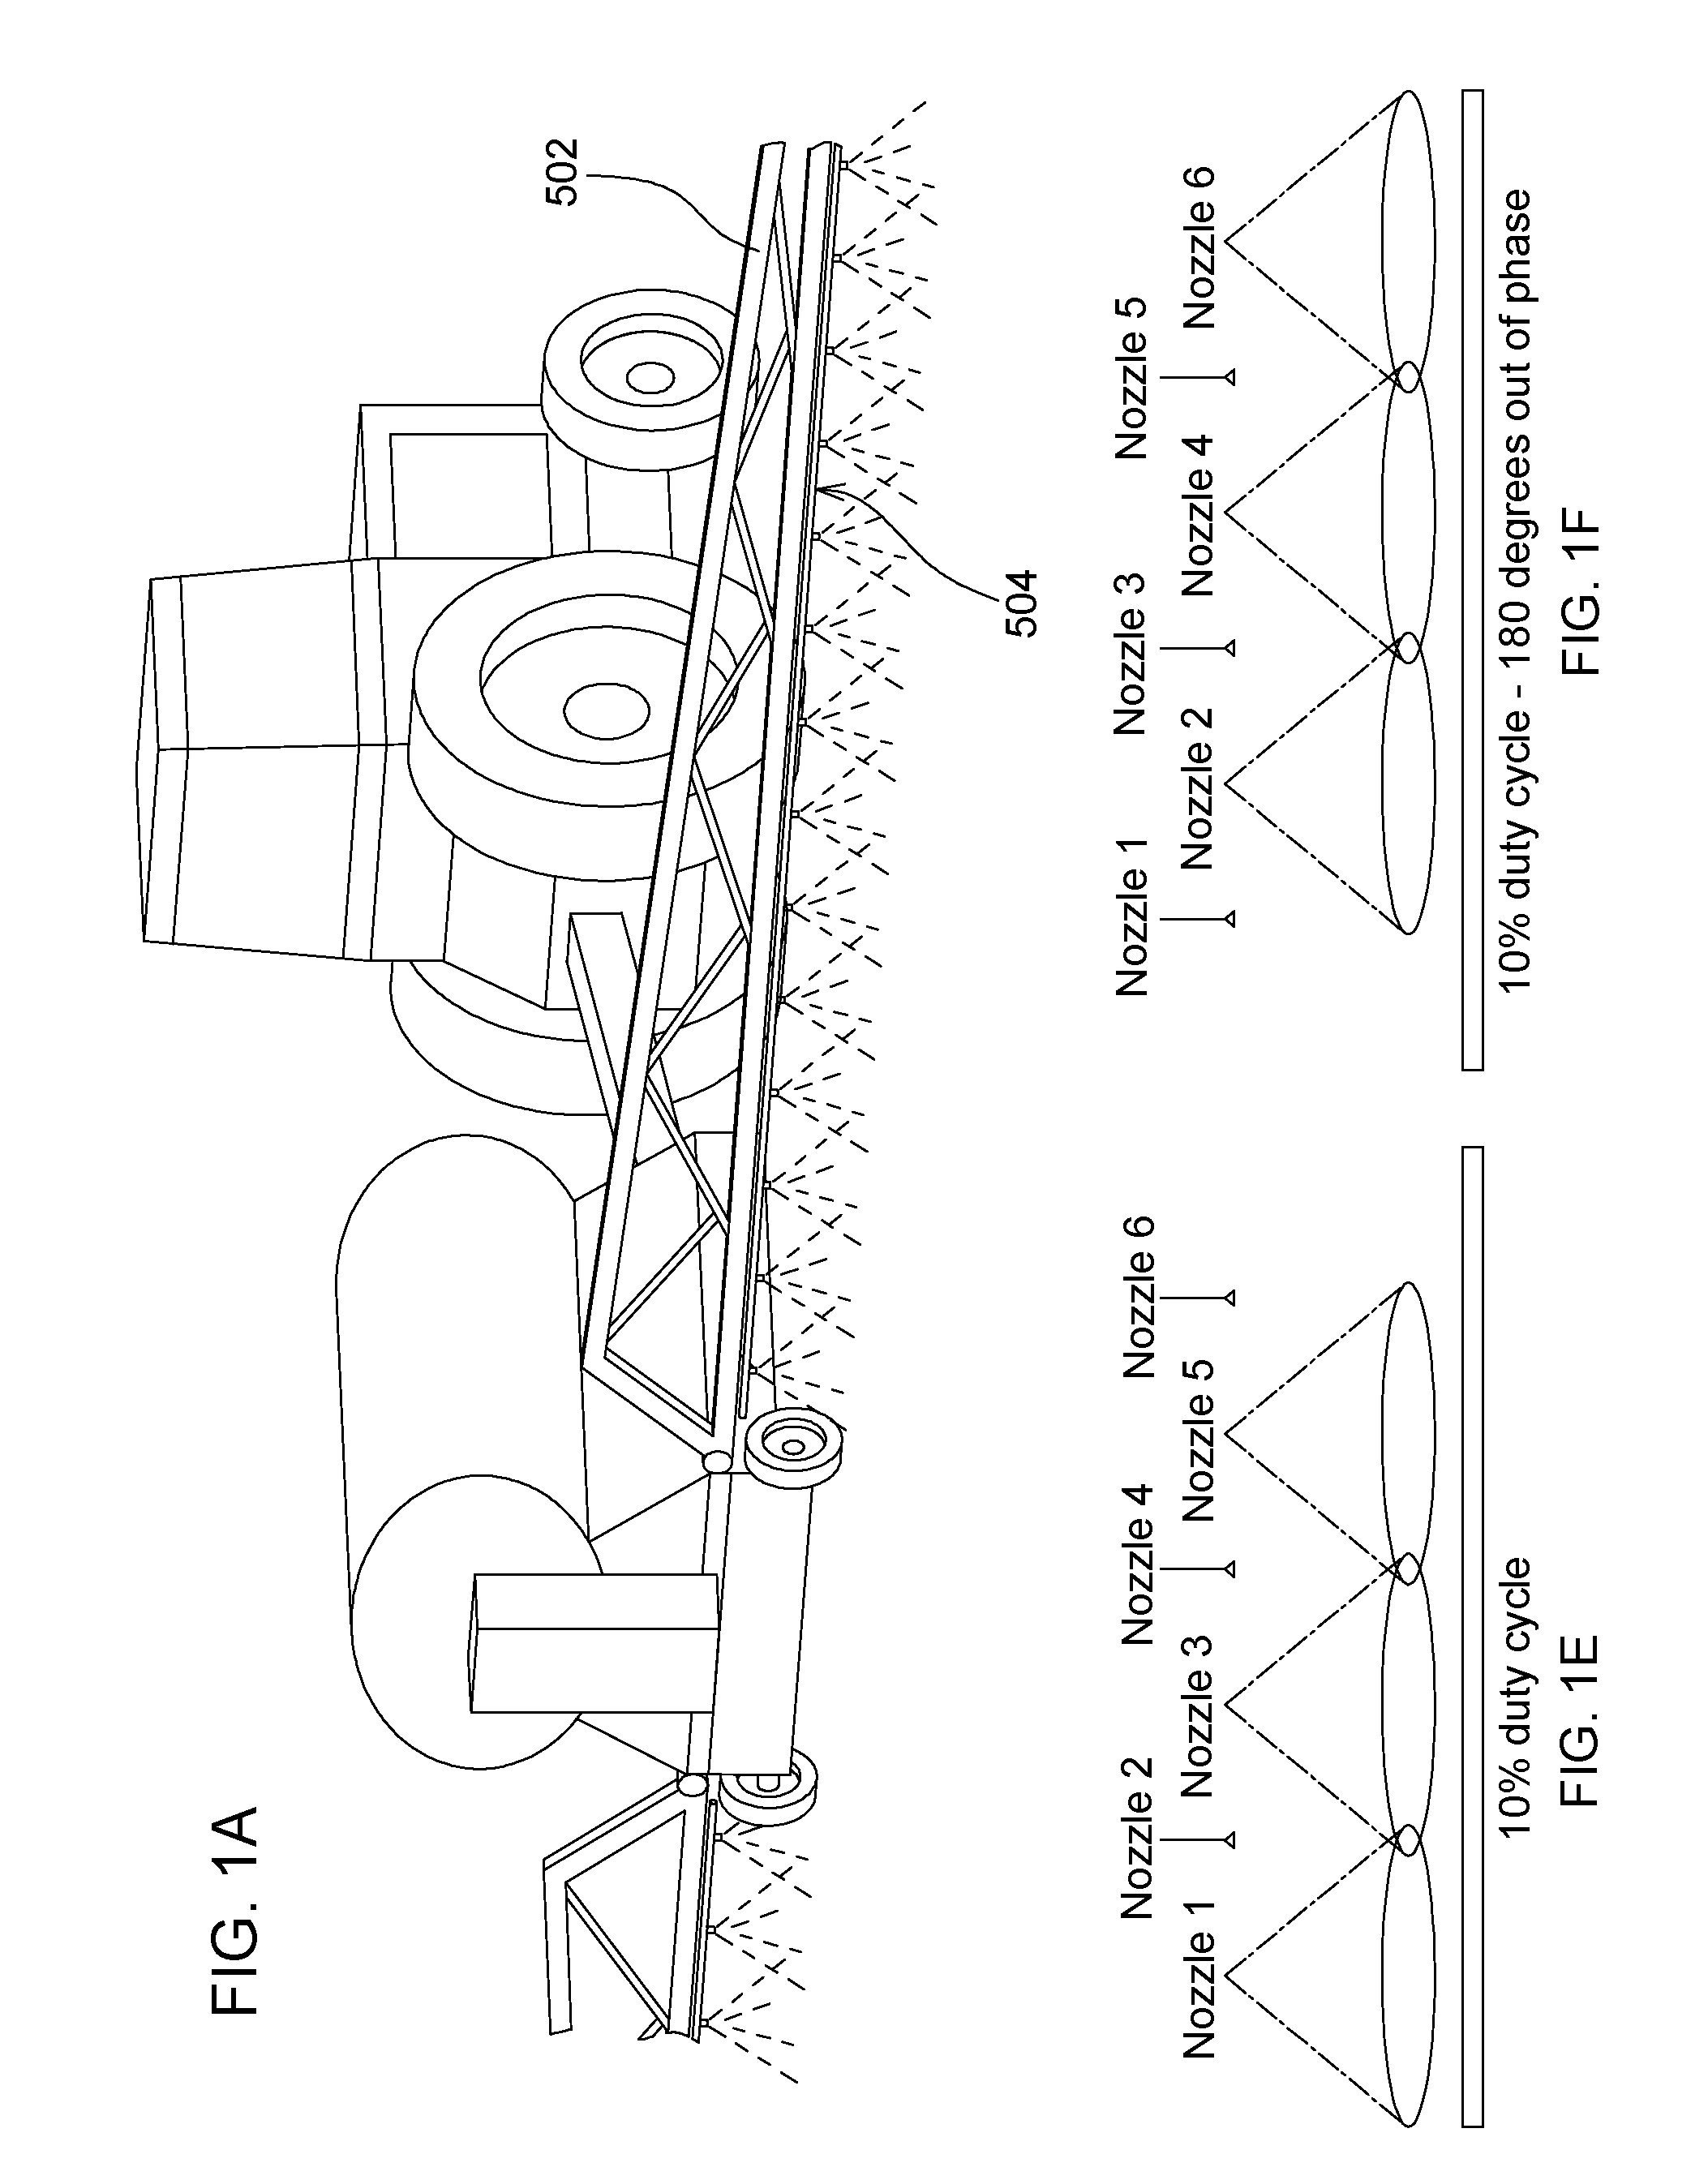 Spray pattern of nozzle systems